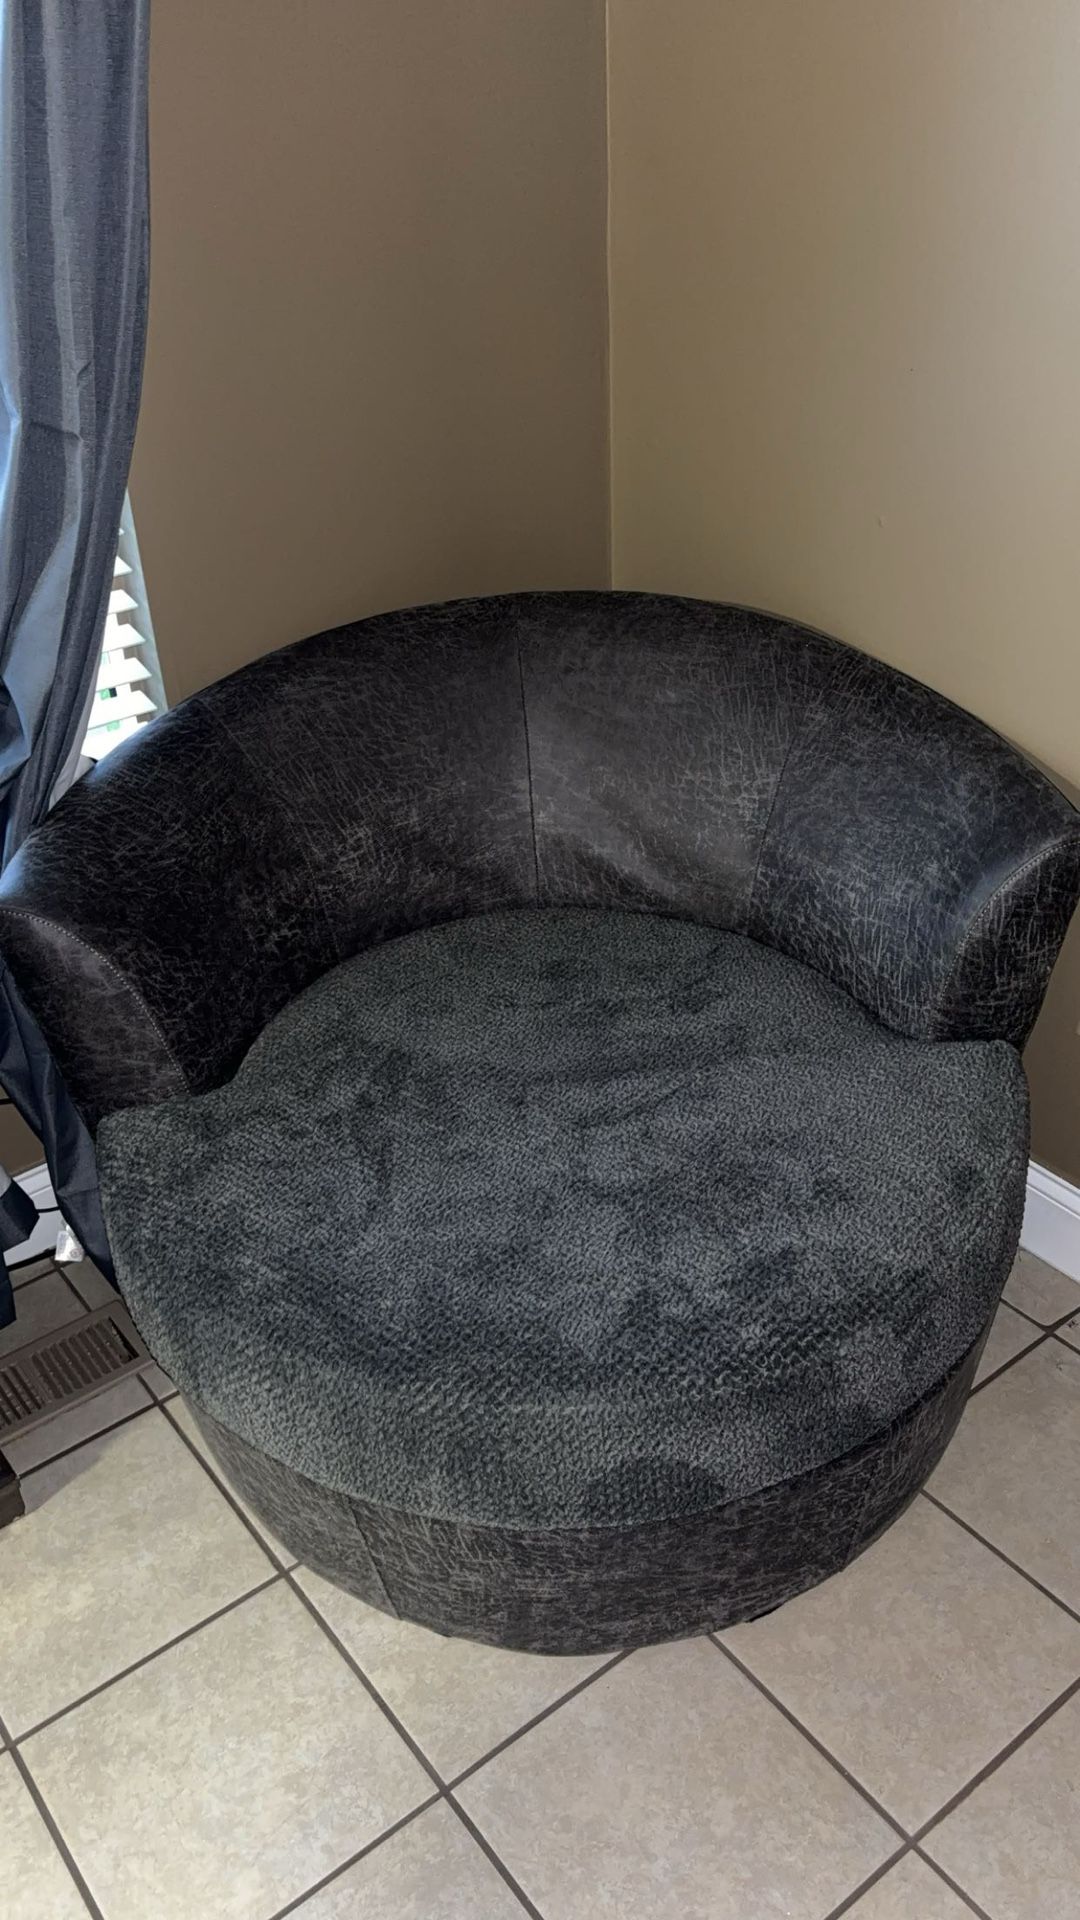 Round couch chair 